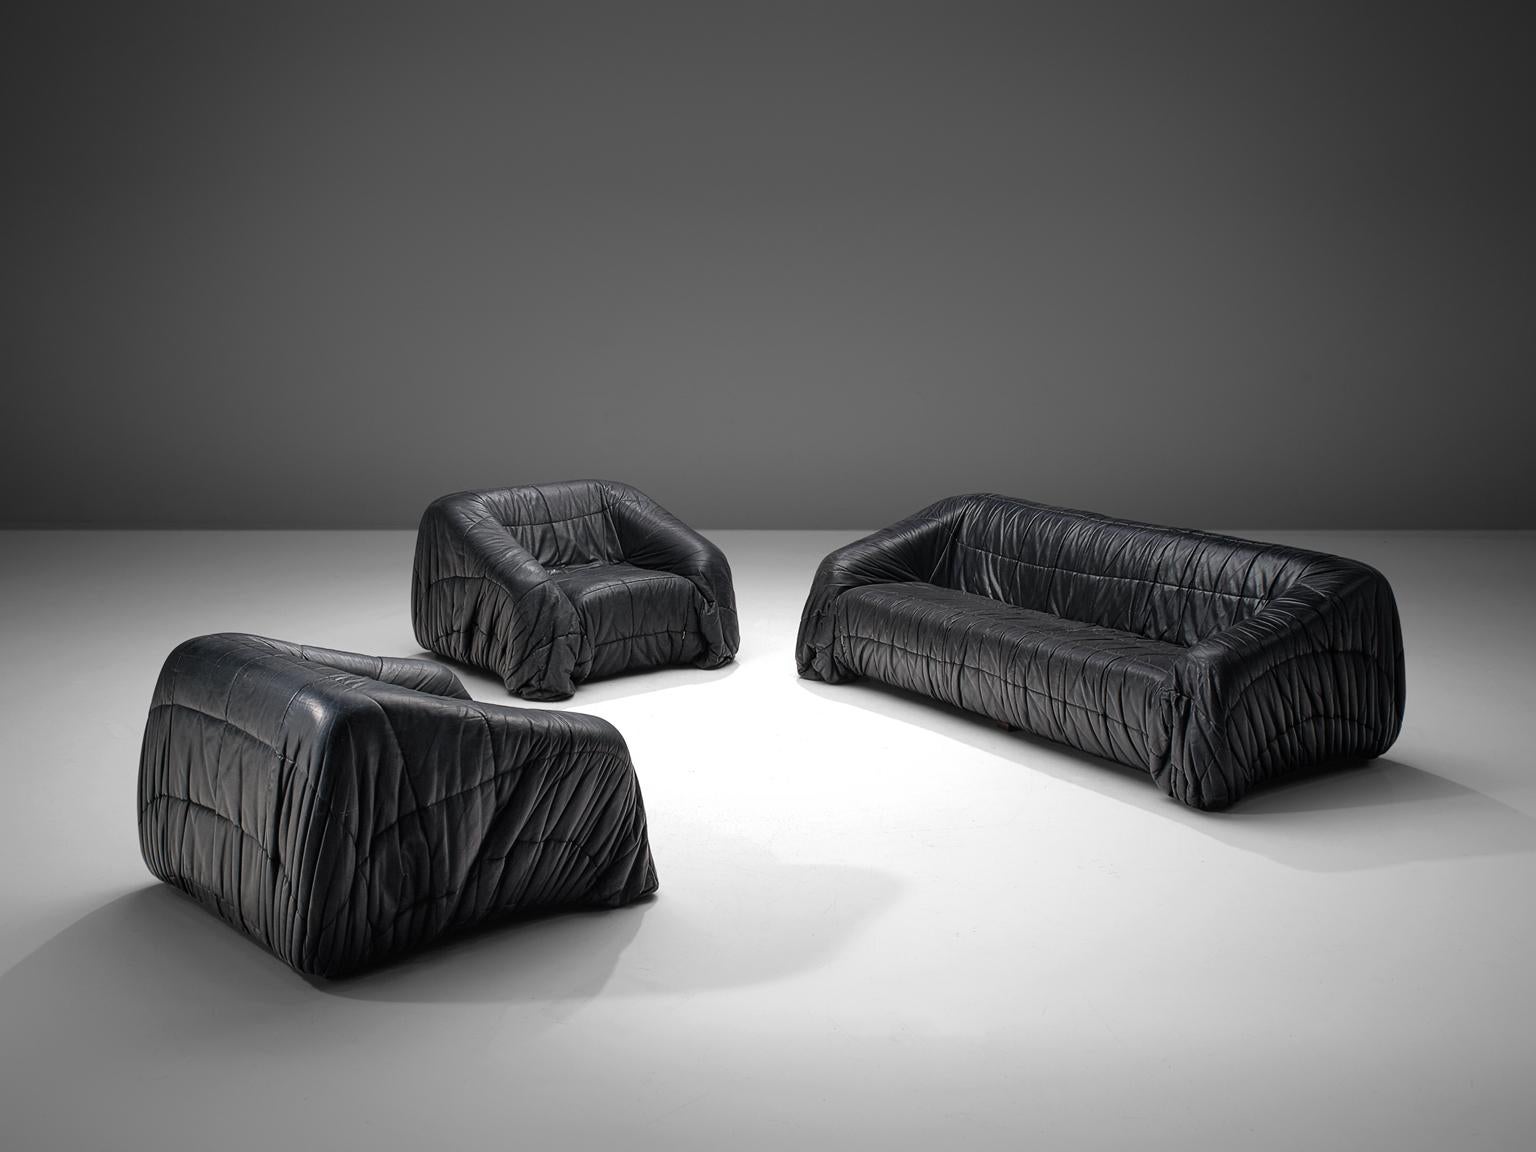 Jonathan de Pas, Donato D'urbino & Paolo Lomazzi for Dell'Oca 'Piumino' lounge living room set, black leatherette, Italy, 1970. 

These lounge chairs and sofa are completely moulded out of foam and covered with folded black, thick butter-soft